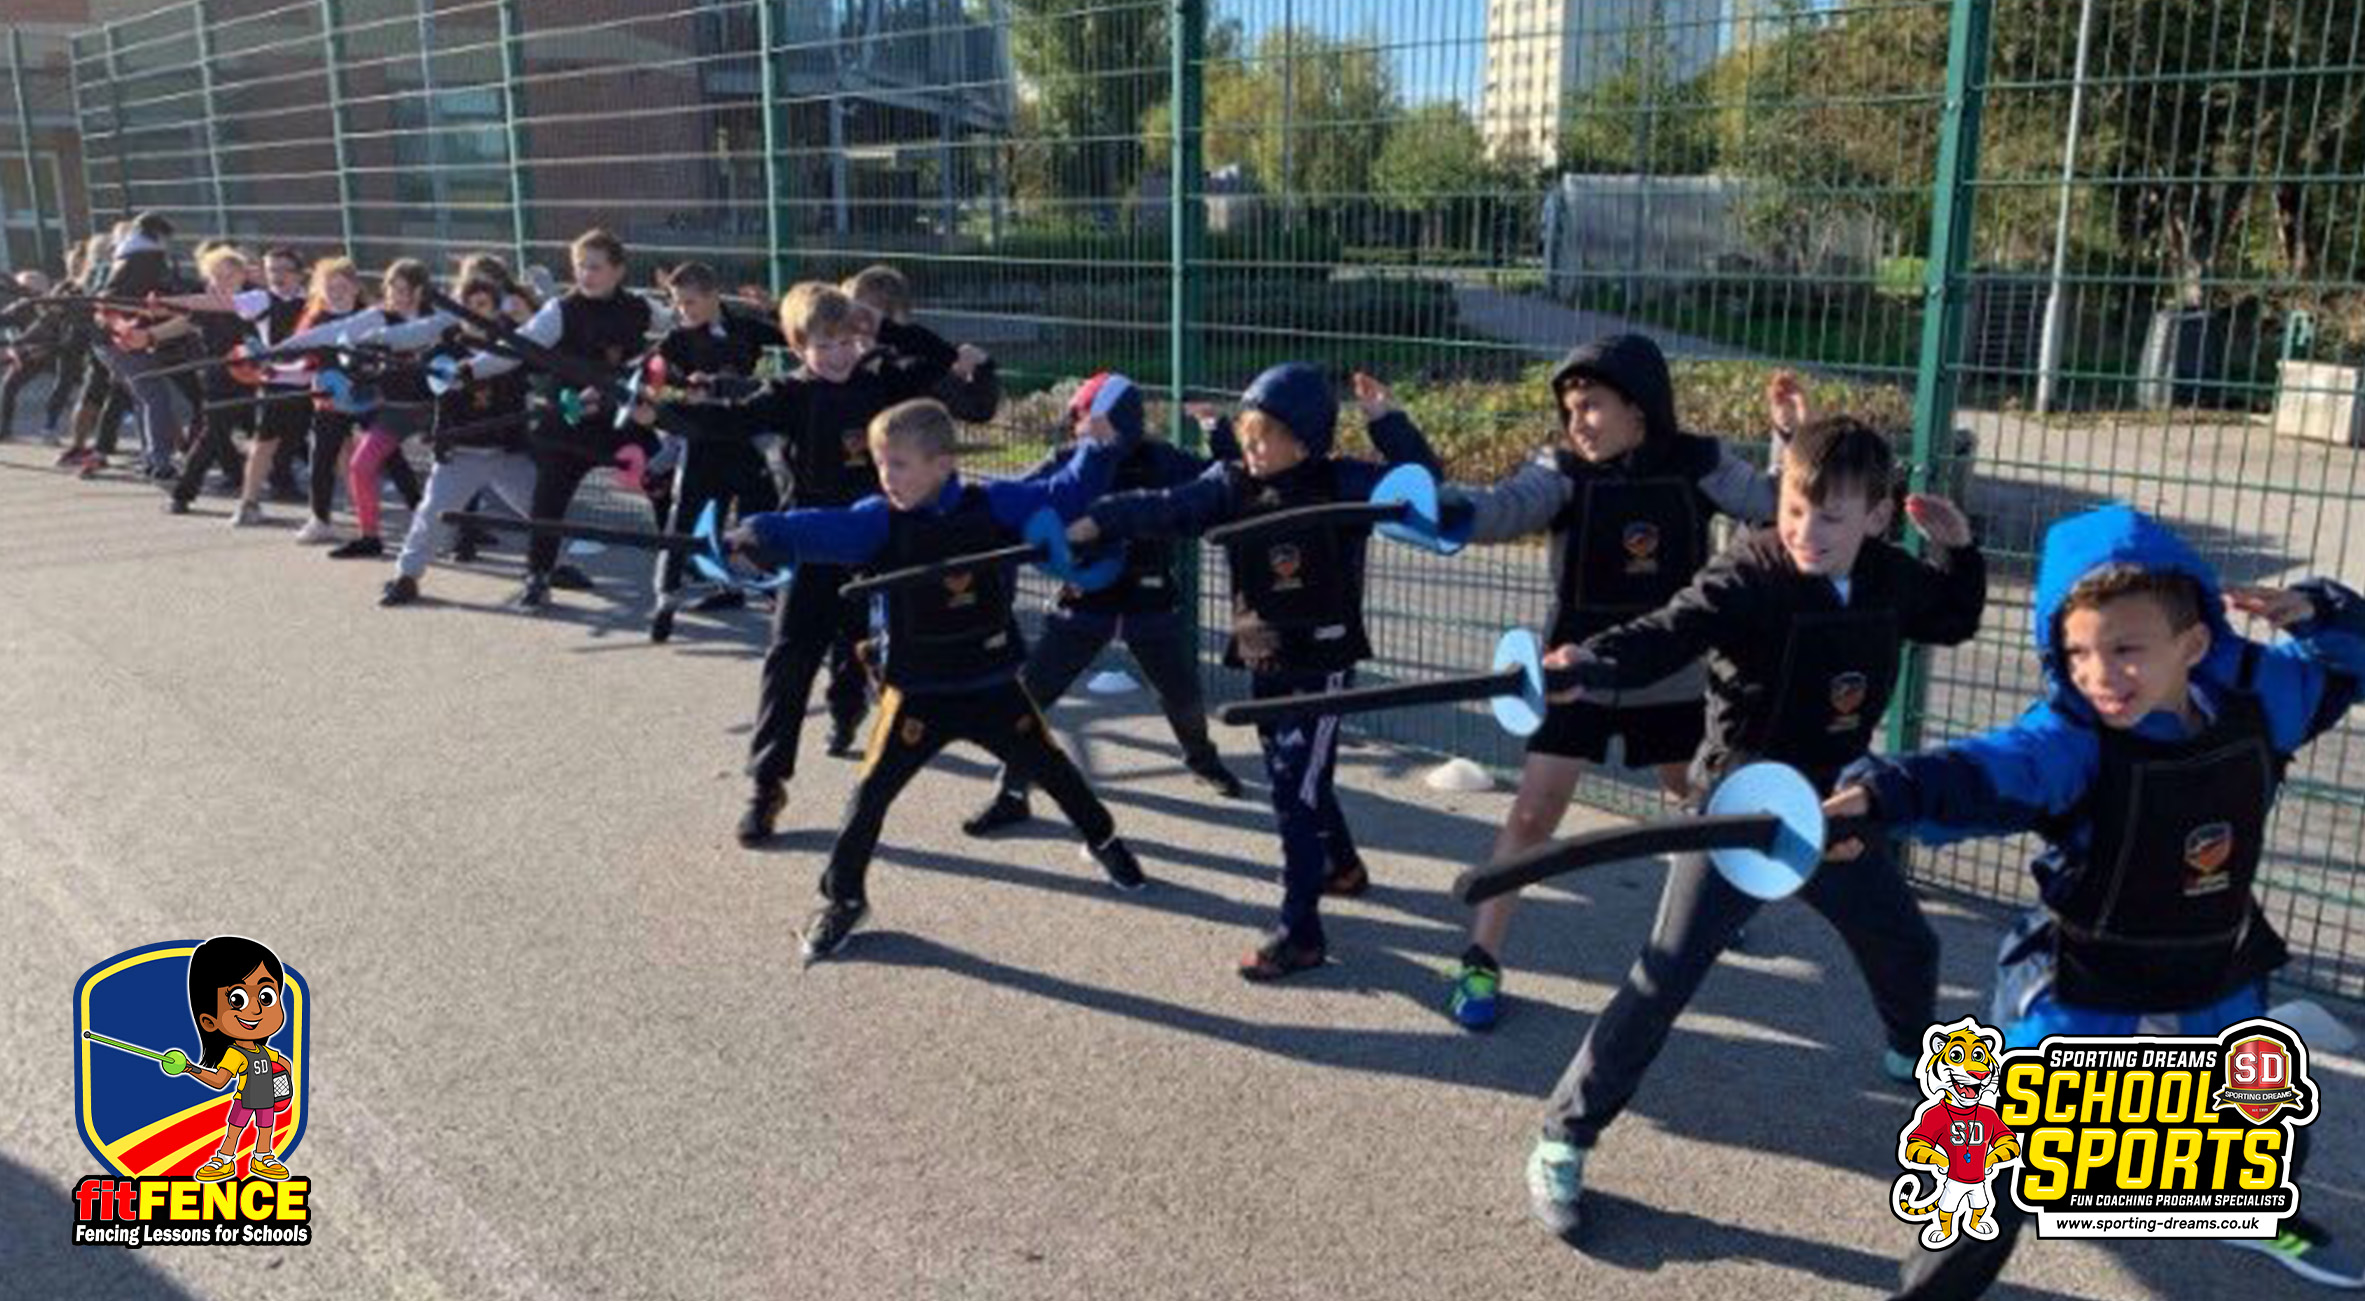 Fitfence - Fencing Lessons for Primary Schools